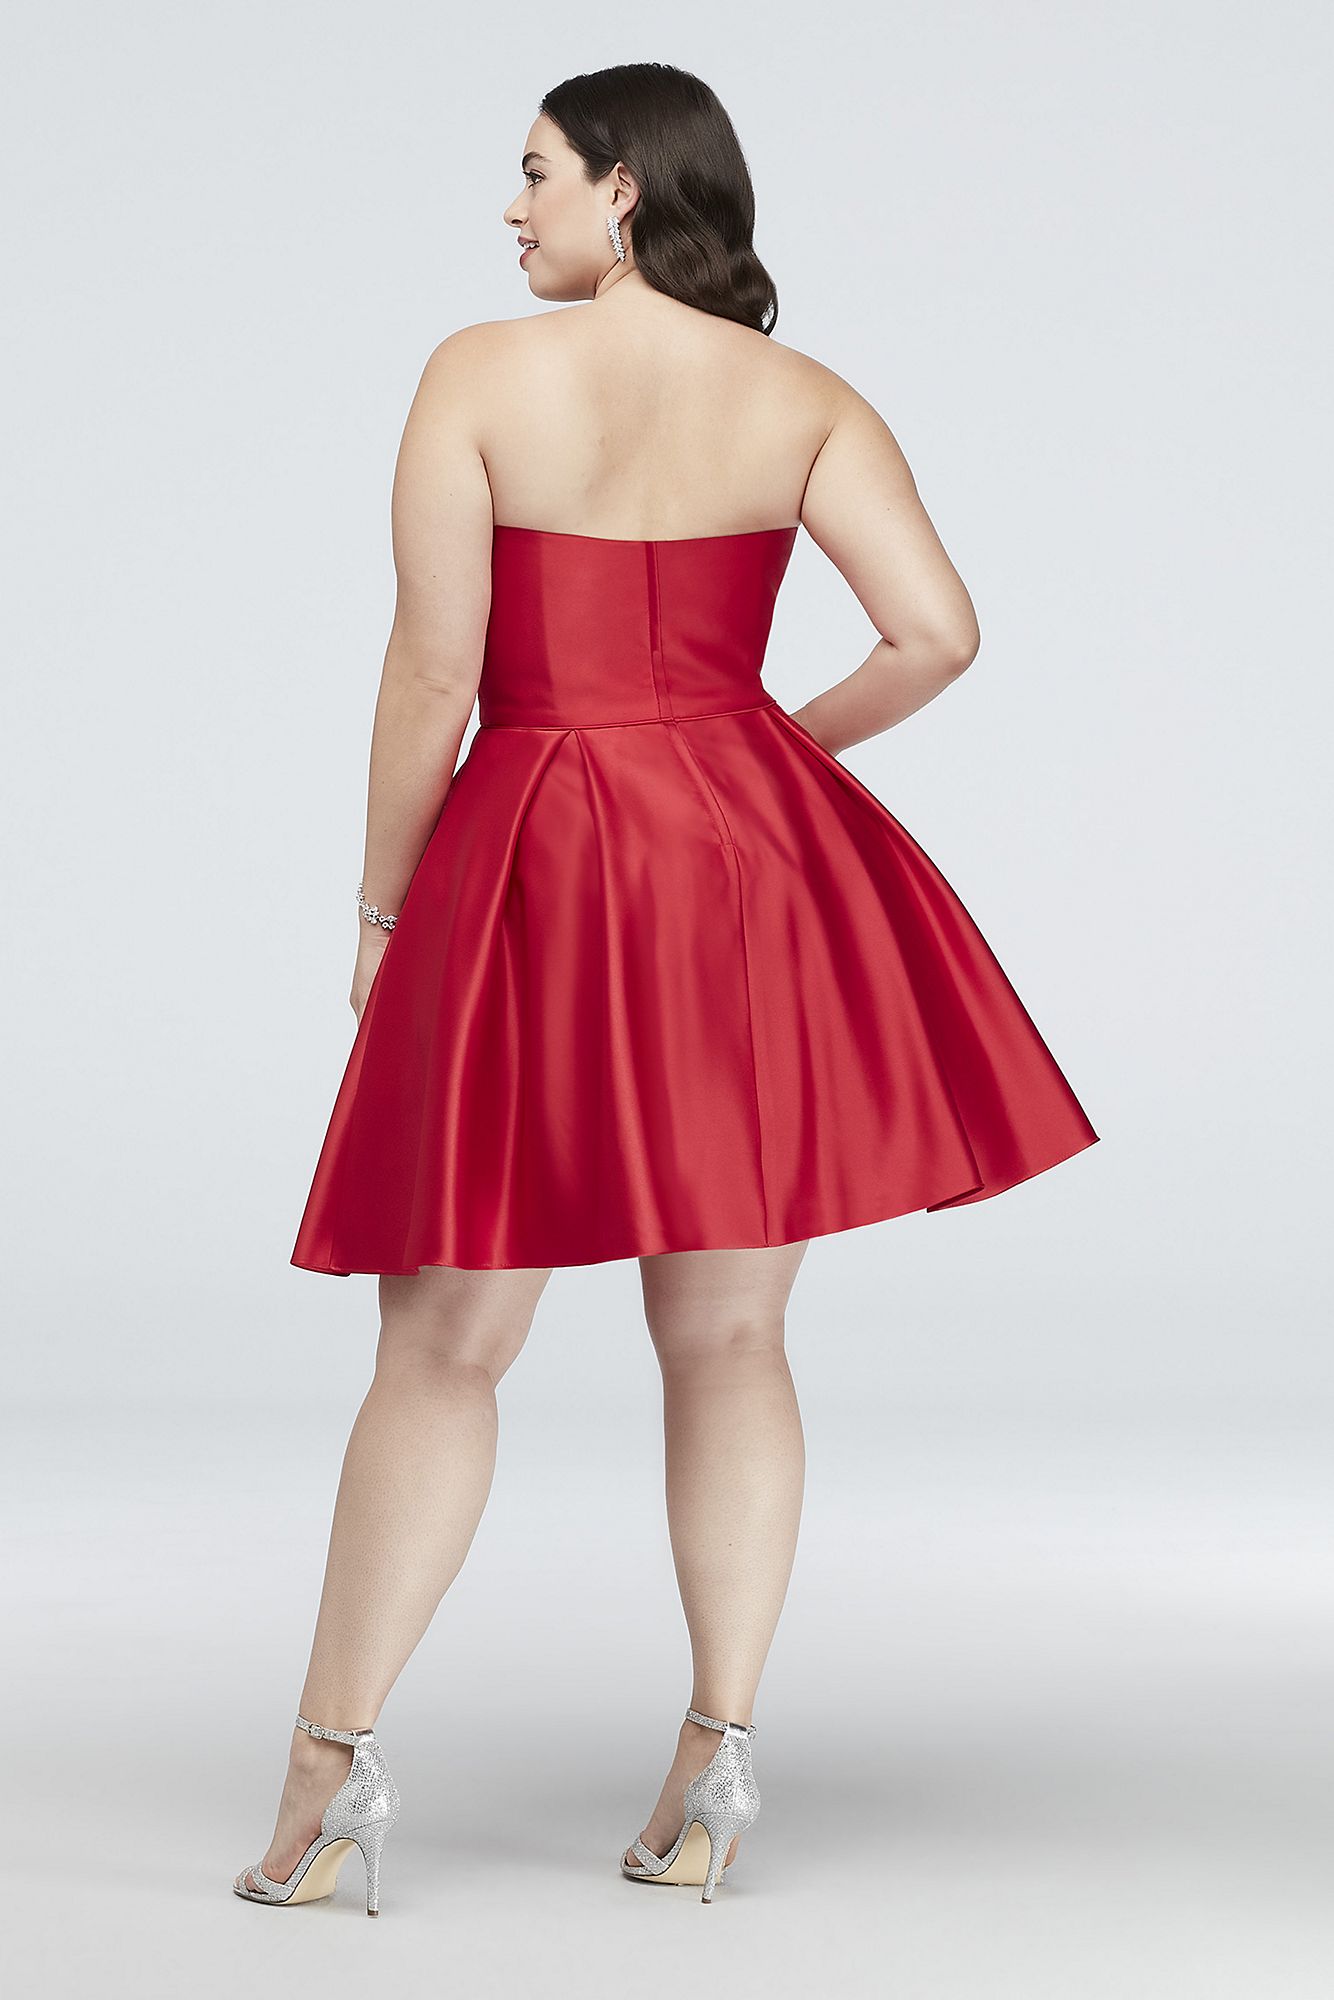 Satin Plus Size Party Dress with Crystal Pockets 345BNW